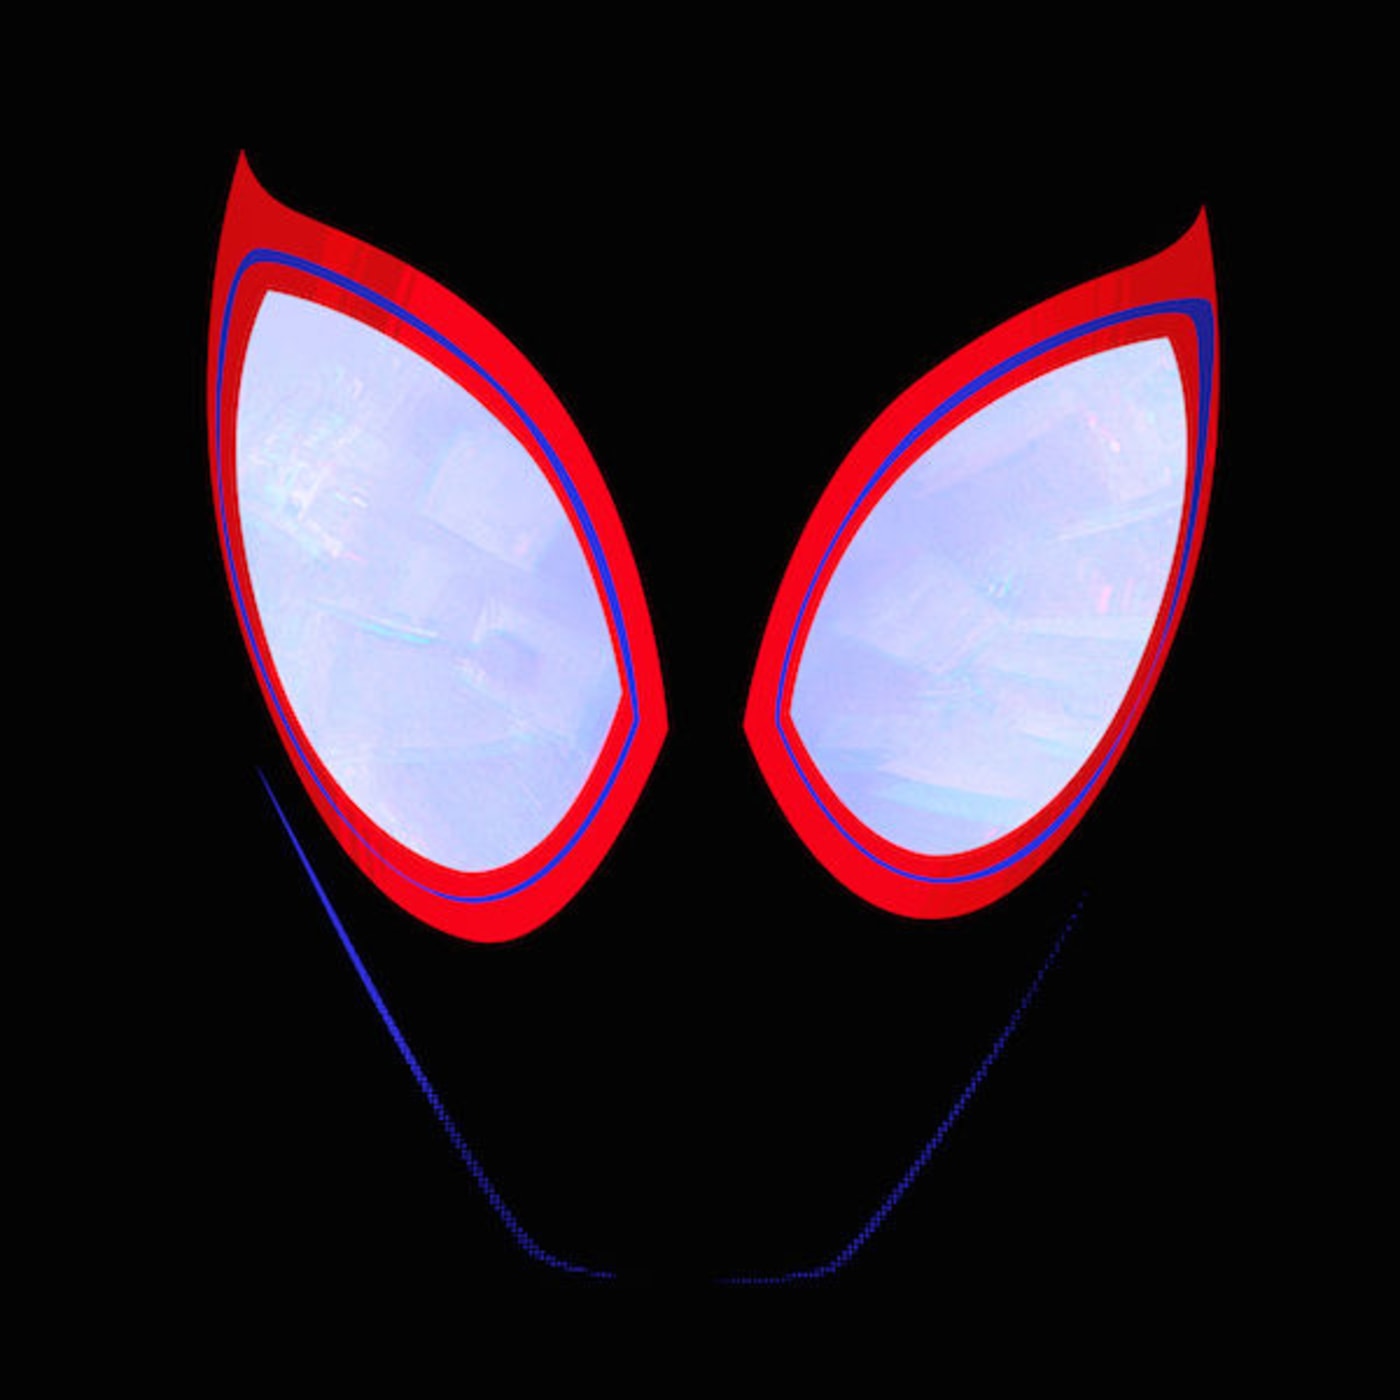 Spider Man: Into the Spider Verse soundtrack